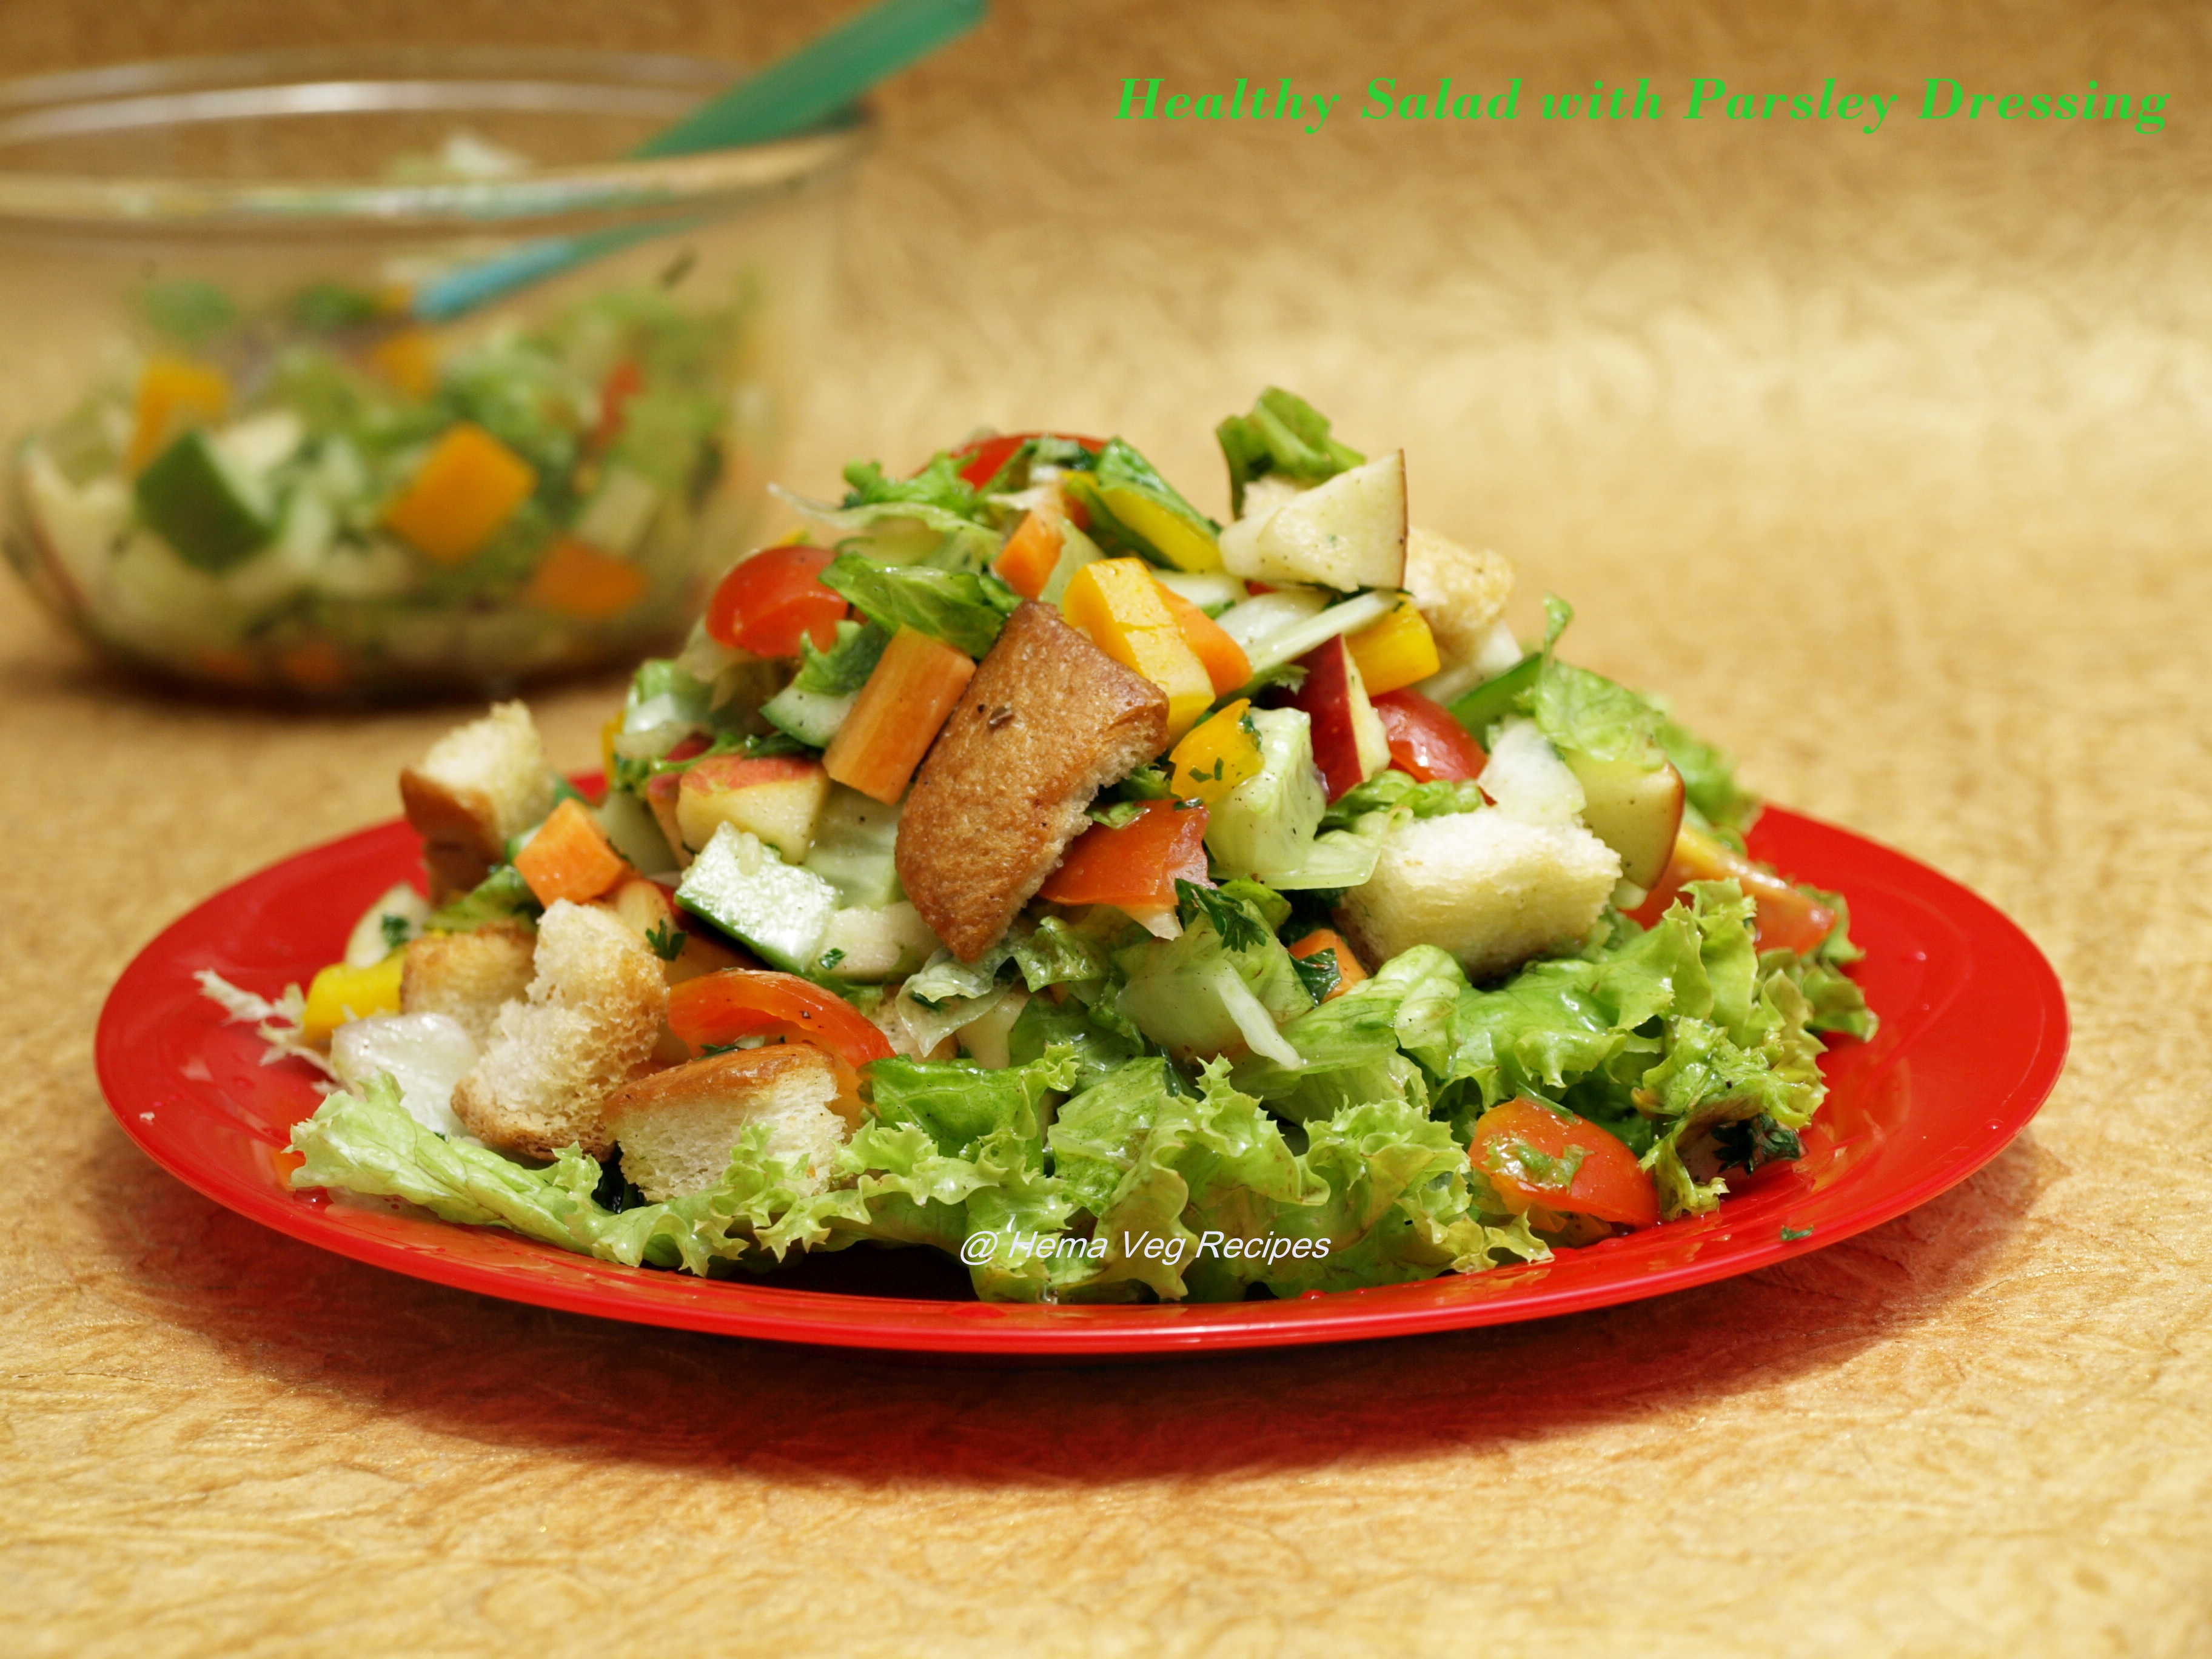 Healthy Salad With Parsley Dressing